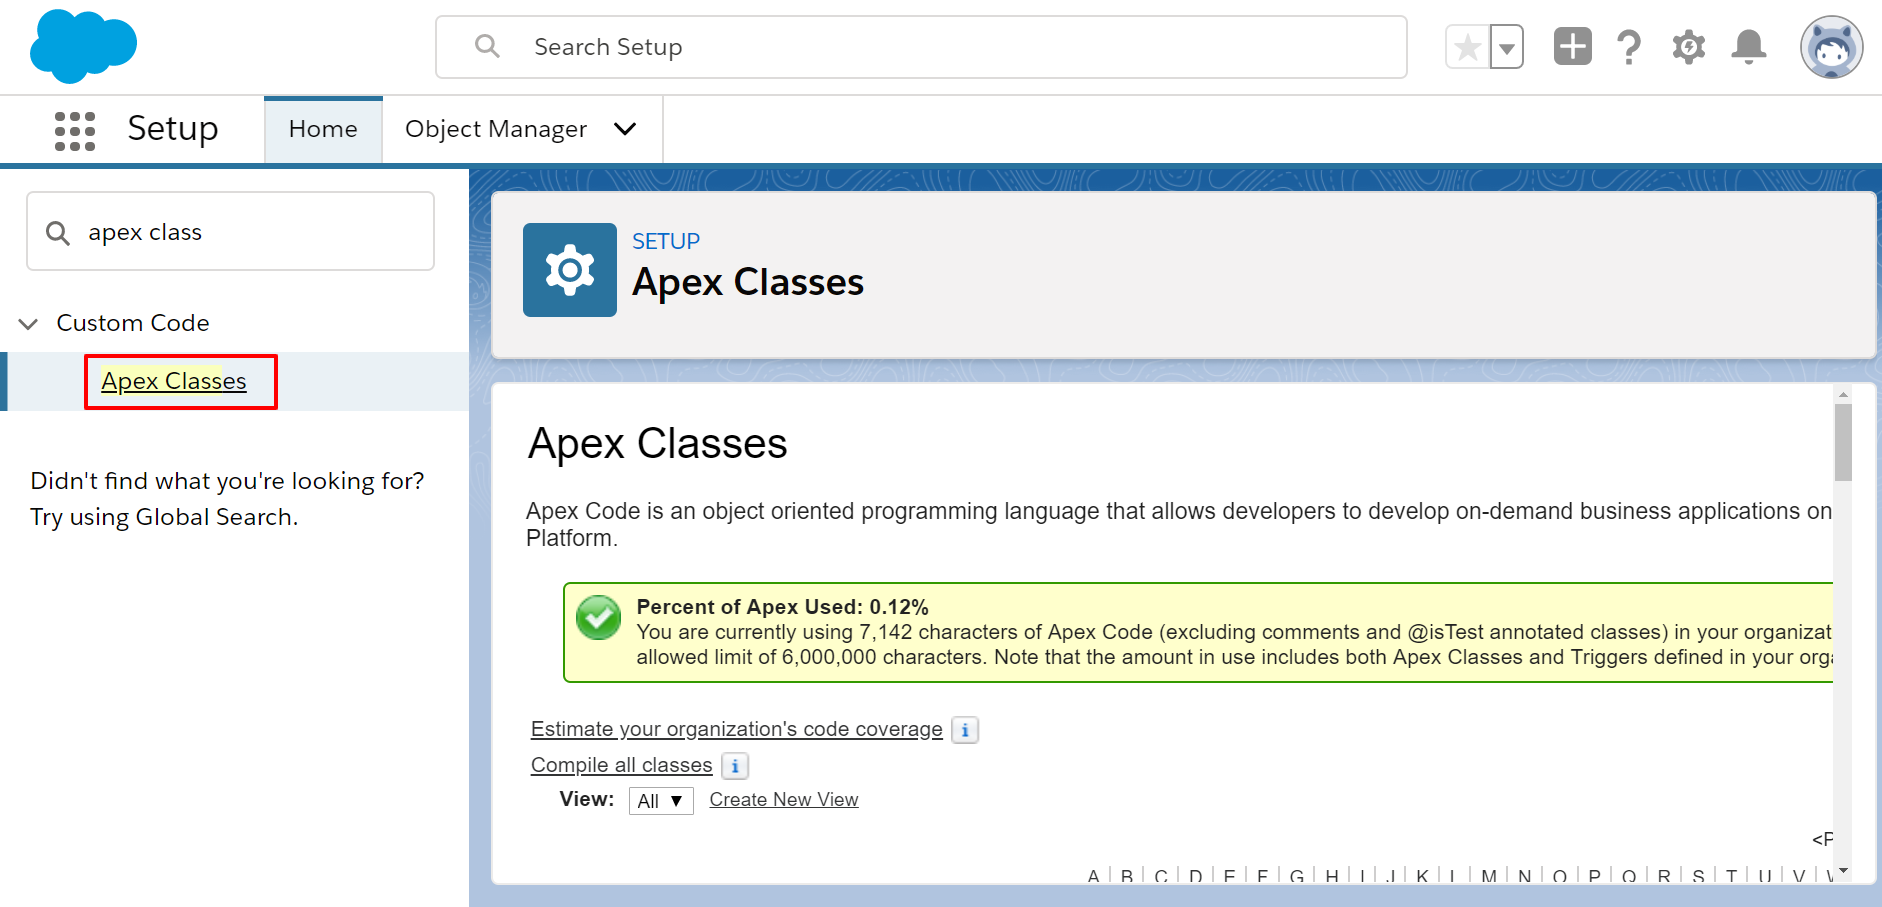 AwesomeScreenshot-Apex-Classes-Salesforce-2019-07-03-02-07-94.png